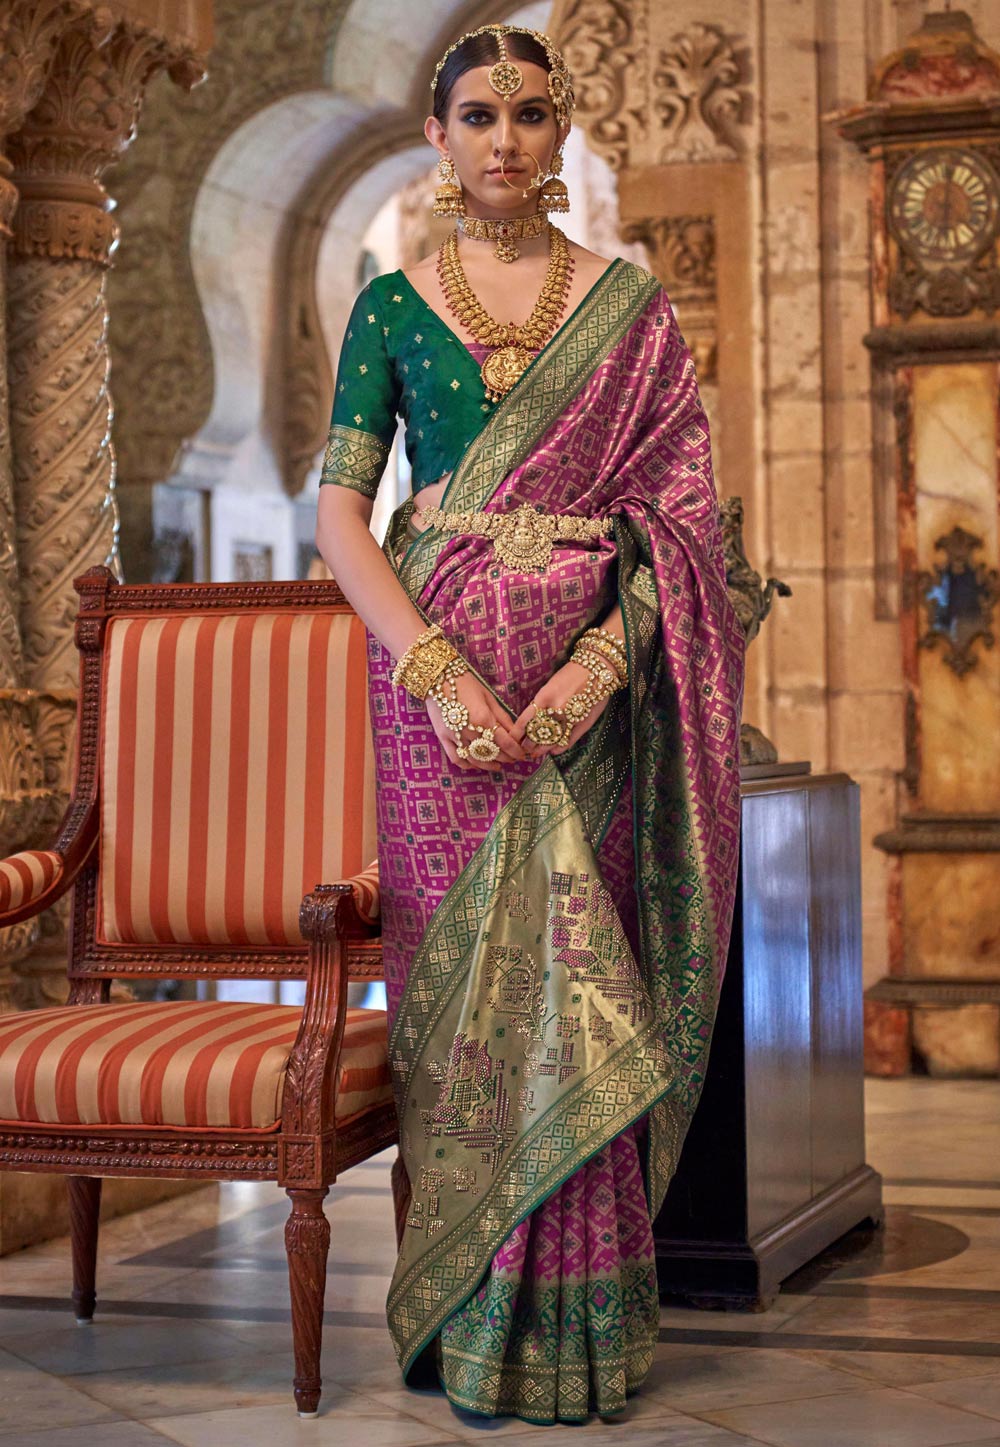 JM Fashion Boutiques - Kanchi silk cotton saree in apple green and purple  its comes in korvai silk border Saree blouse:Purple Saree price:Rm365  📌📌PM us for price details or whatsapp(+60164087170) 📌📌 free